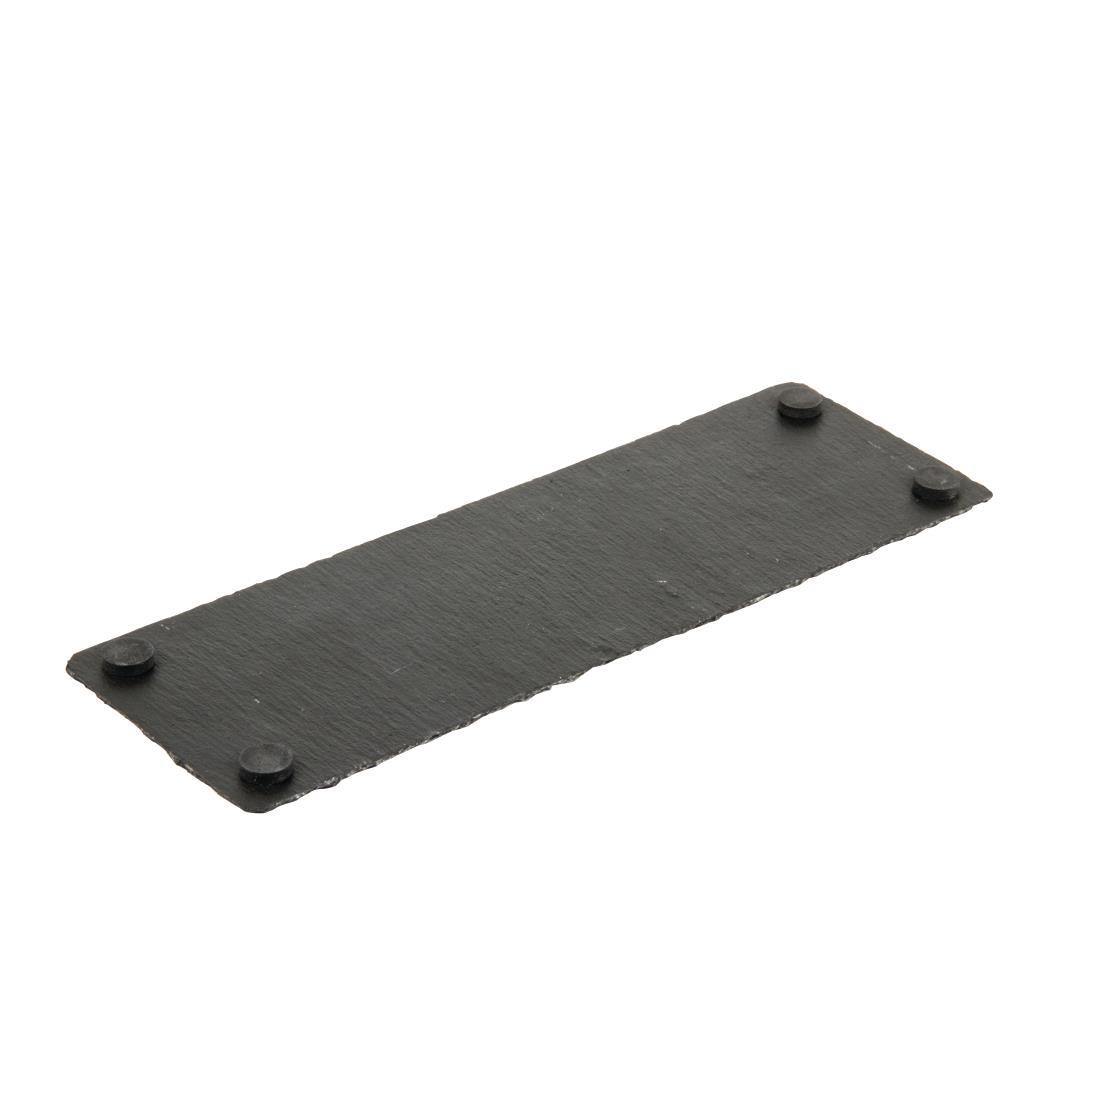 Olympia Natural Slate Rectangular Display Trays 300mm (Pack of 4) - CK408  - 5